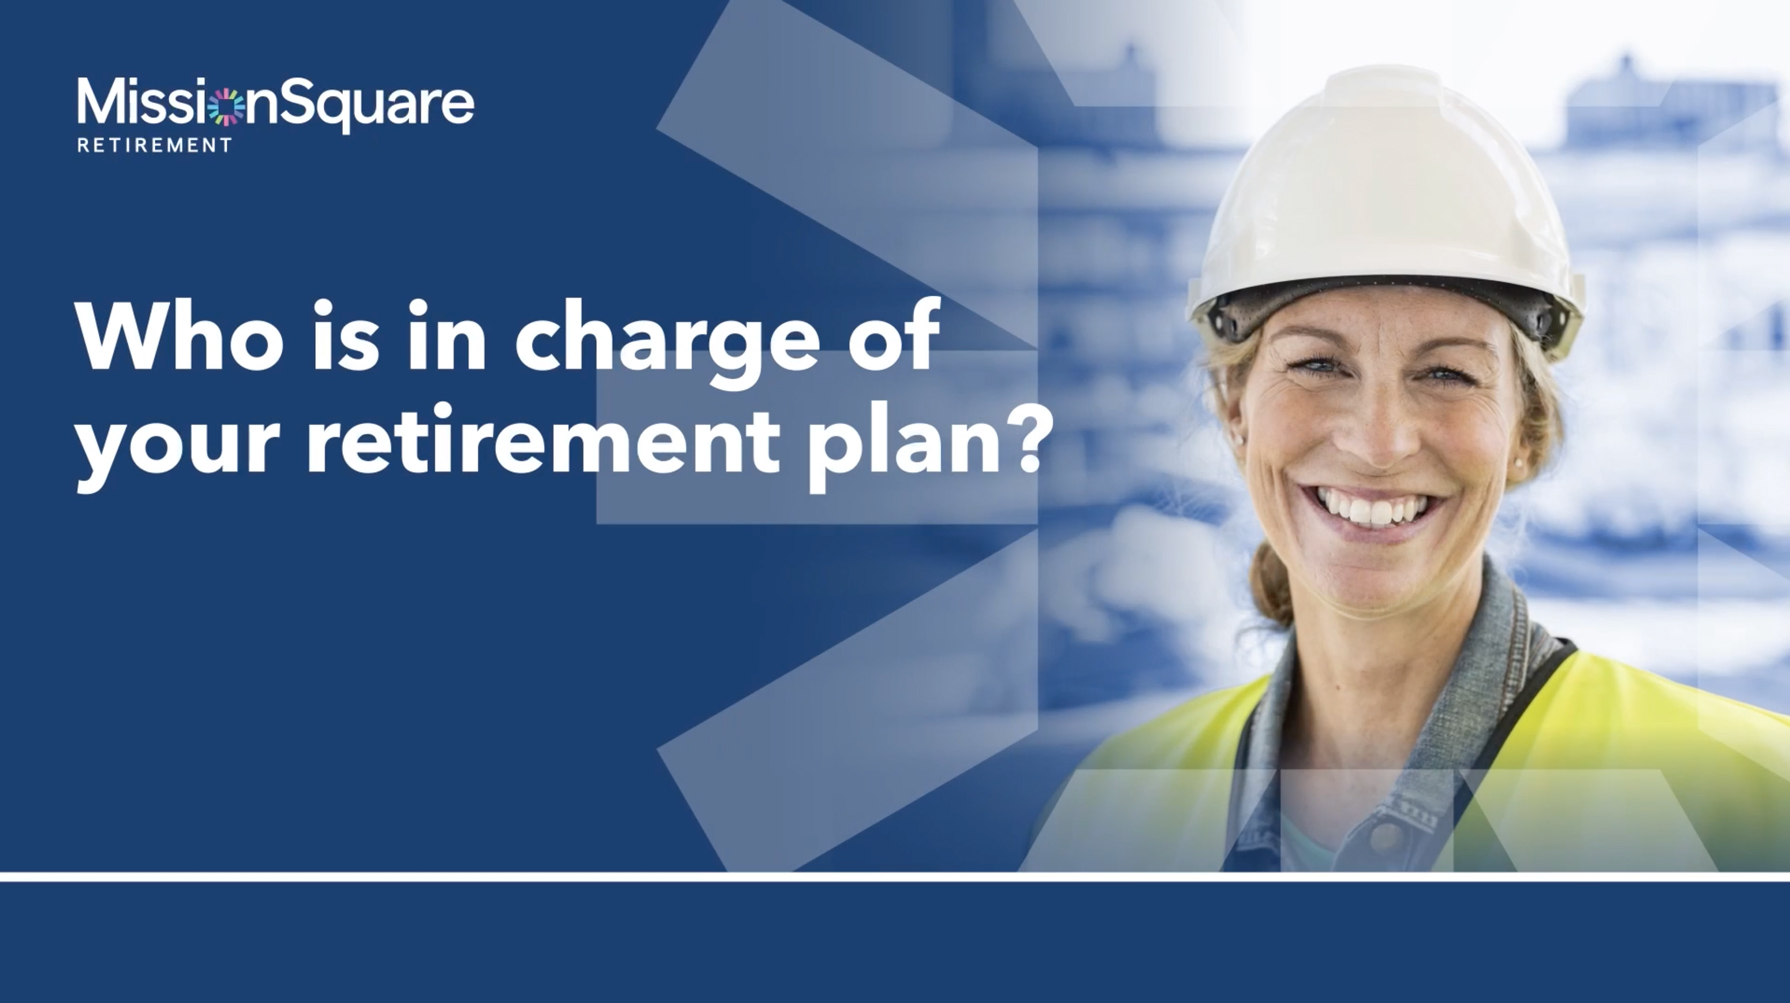 Video: Who’s in Charge of Your Retirement Plan?